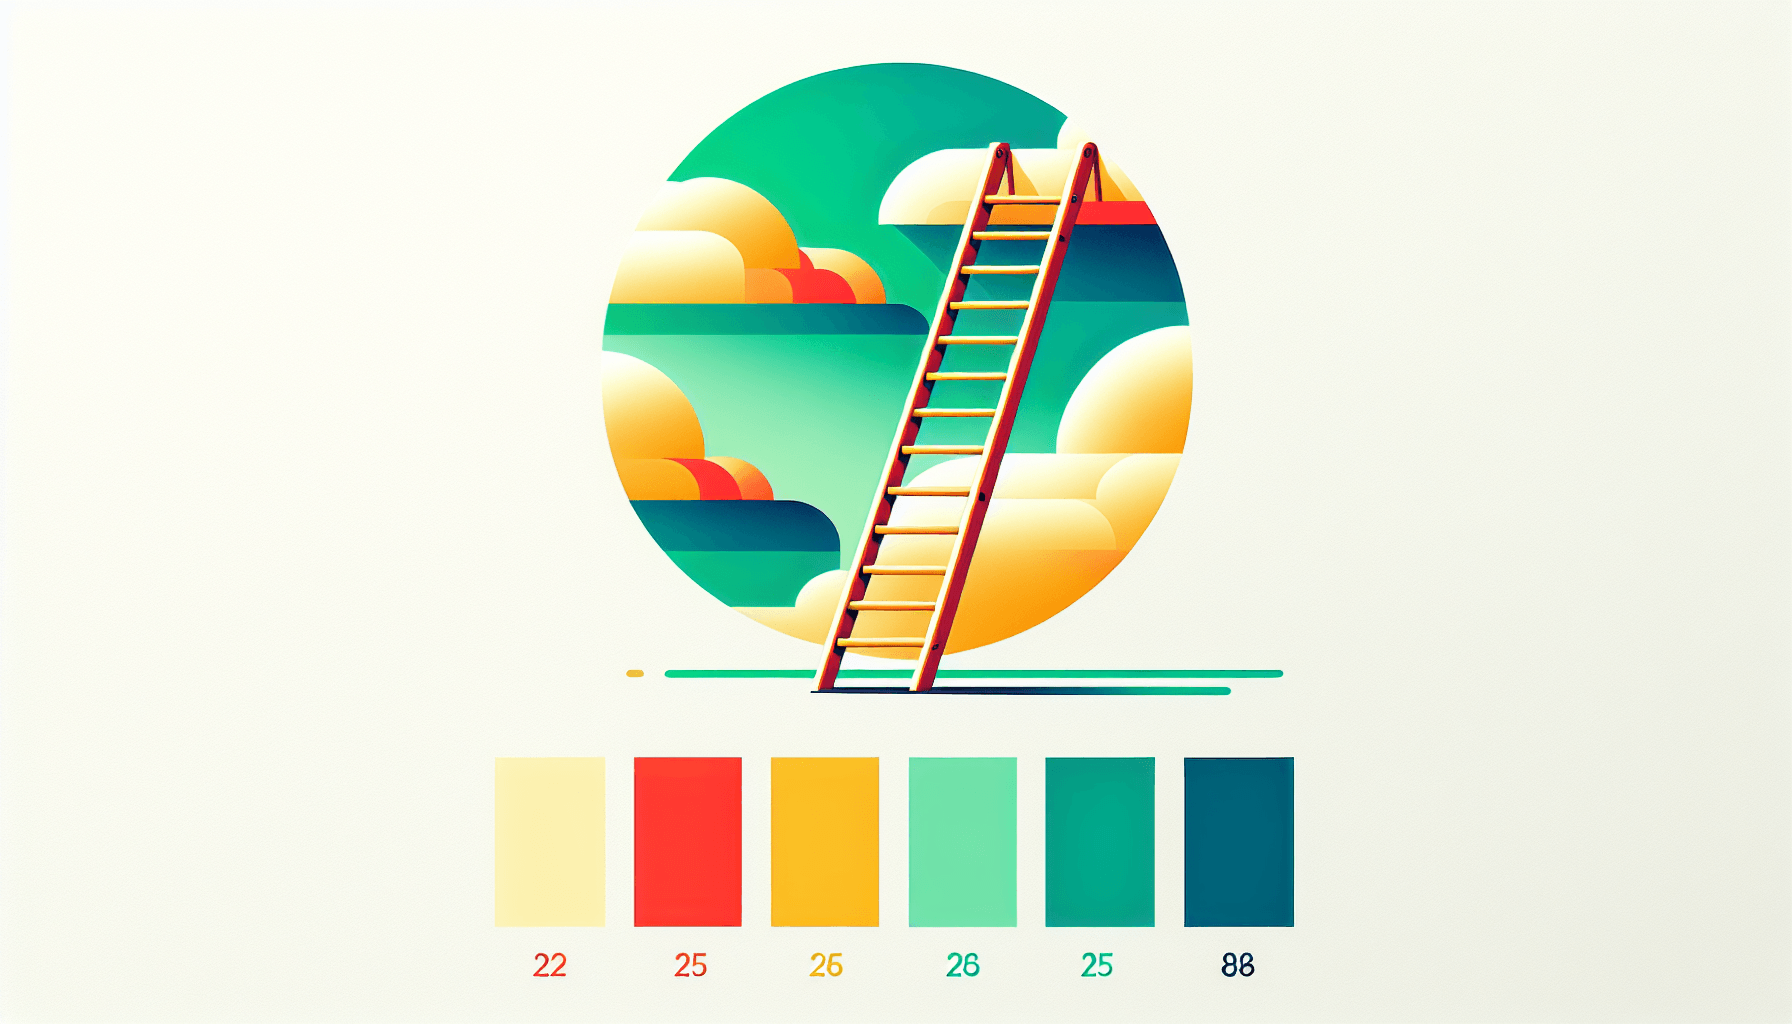 Ladder in flat illustration style and white background, red #f47574, green #88c7a8, yellow #fcc44b, and blue #645bc8 colors.